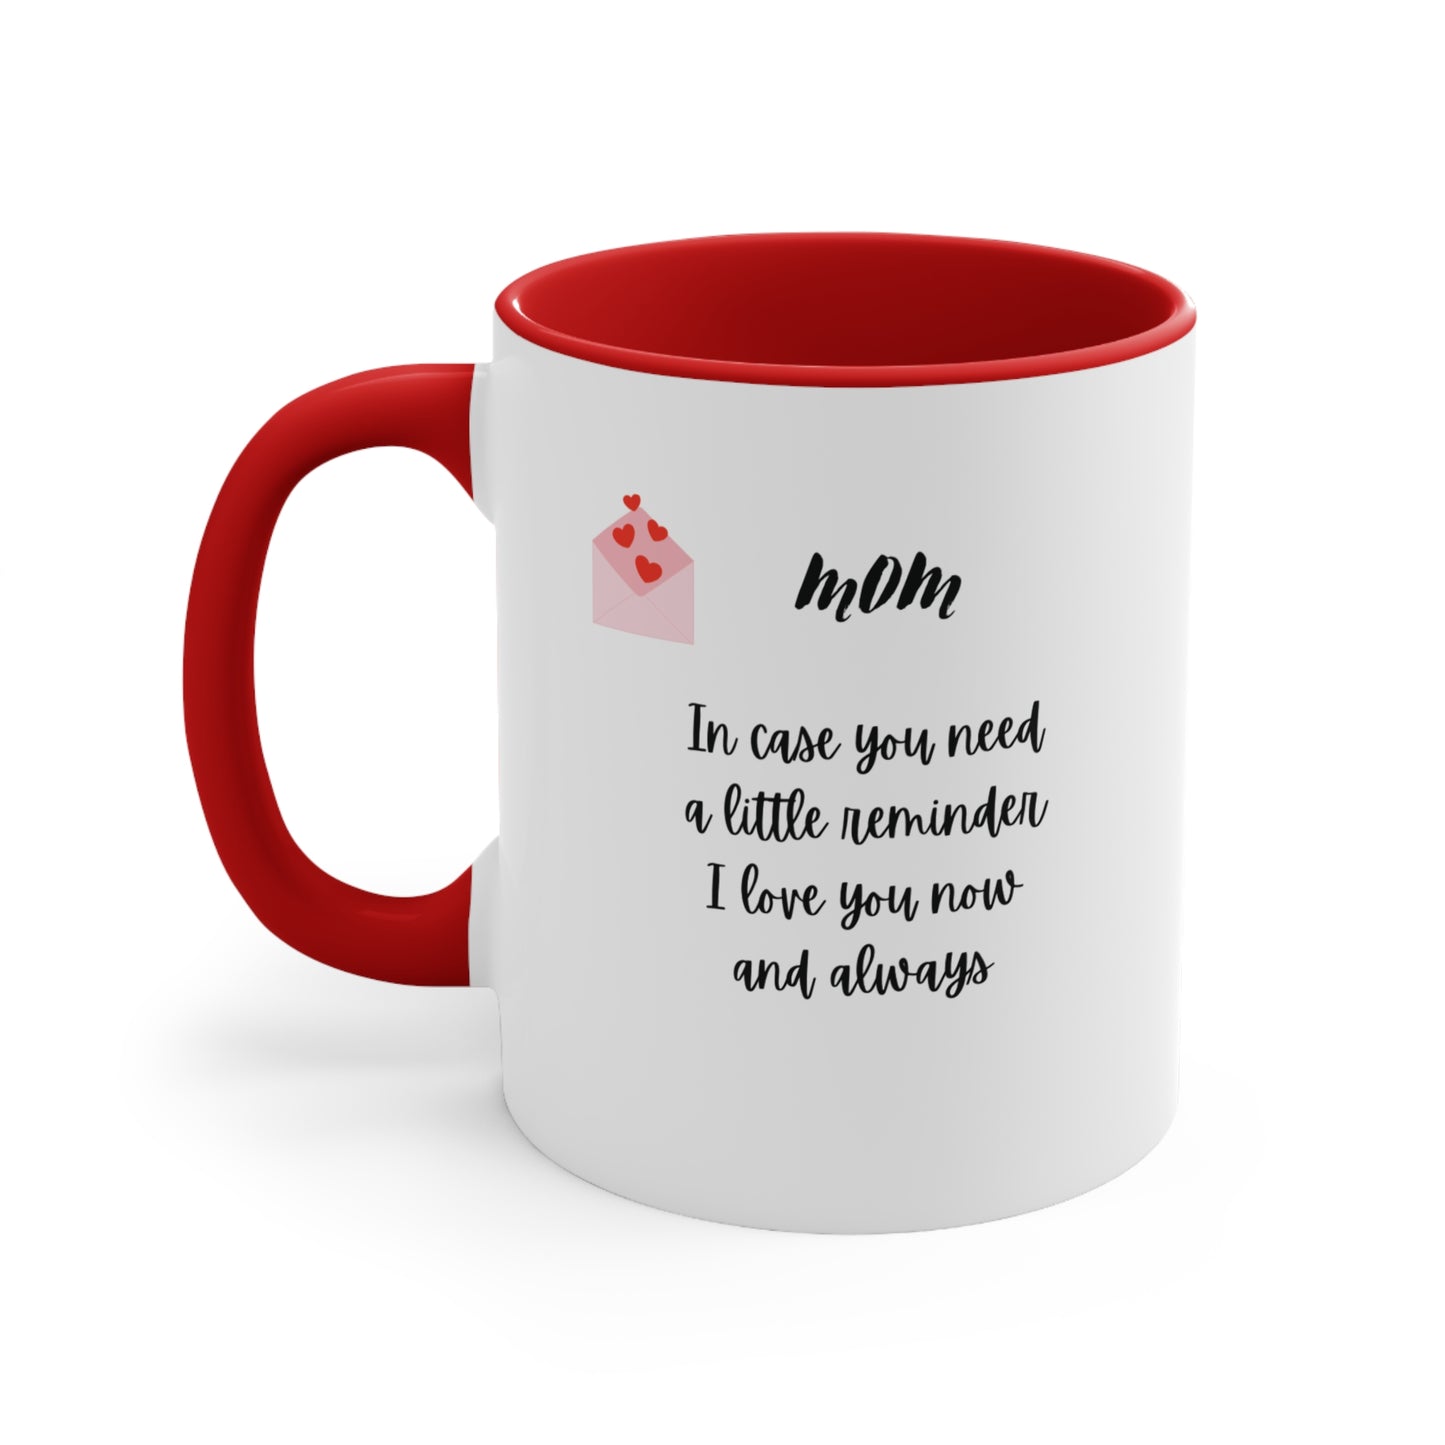 MOM XOXO 11oz ceramic accent coffee mug perfect for Mother's Day gift2